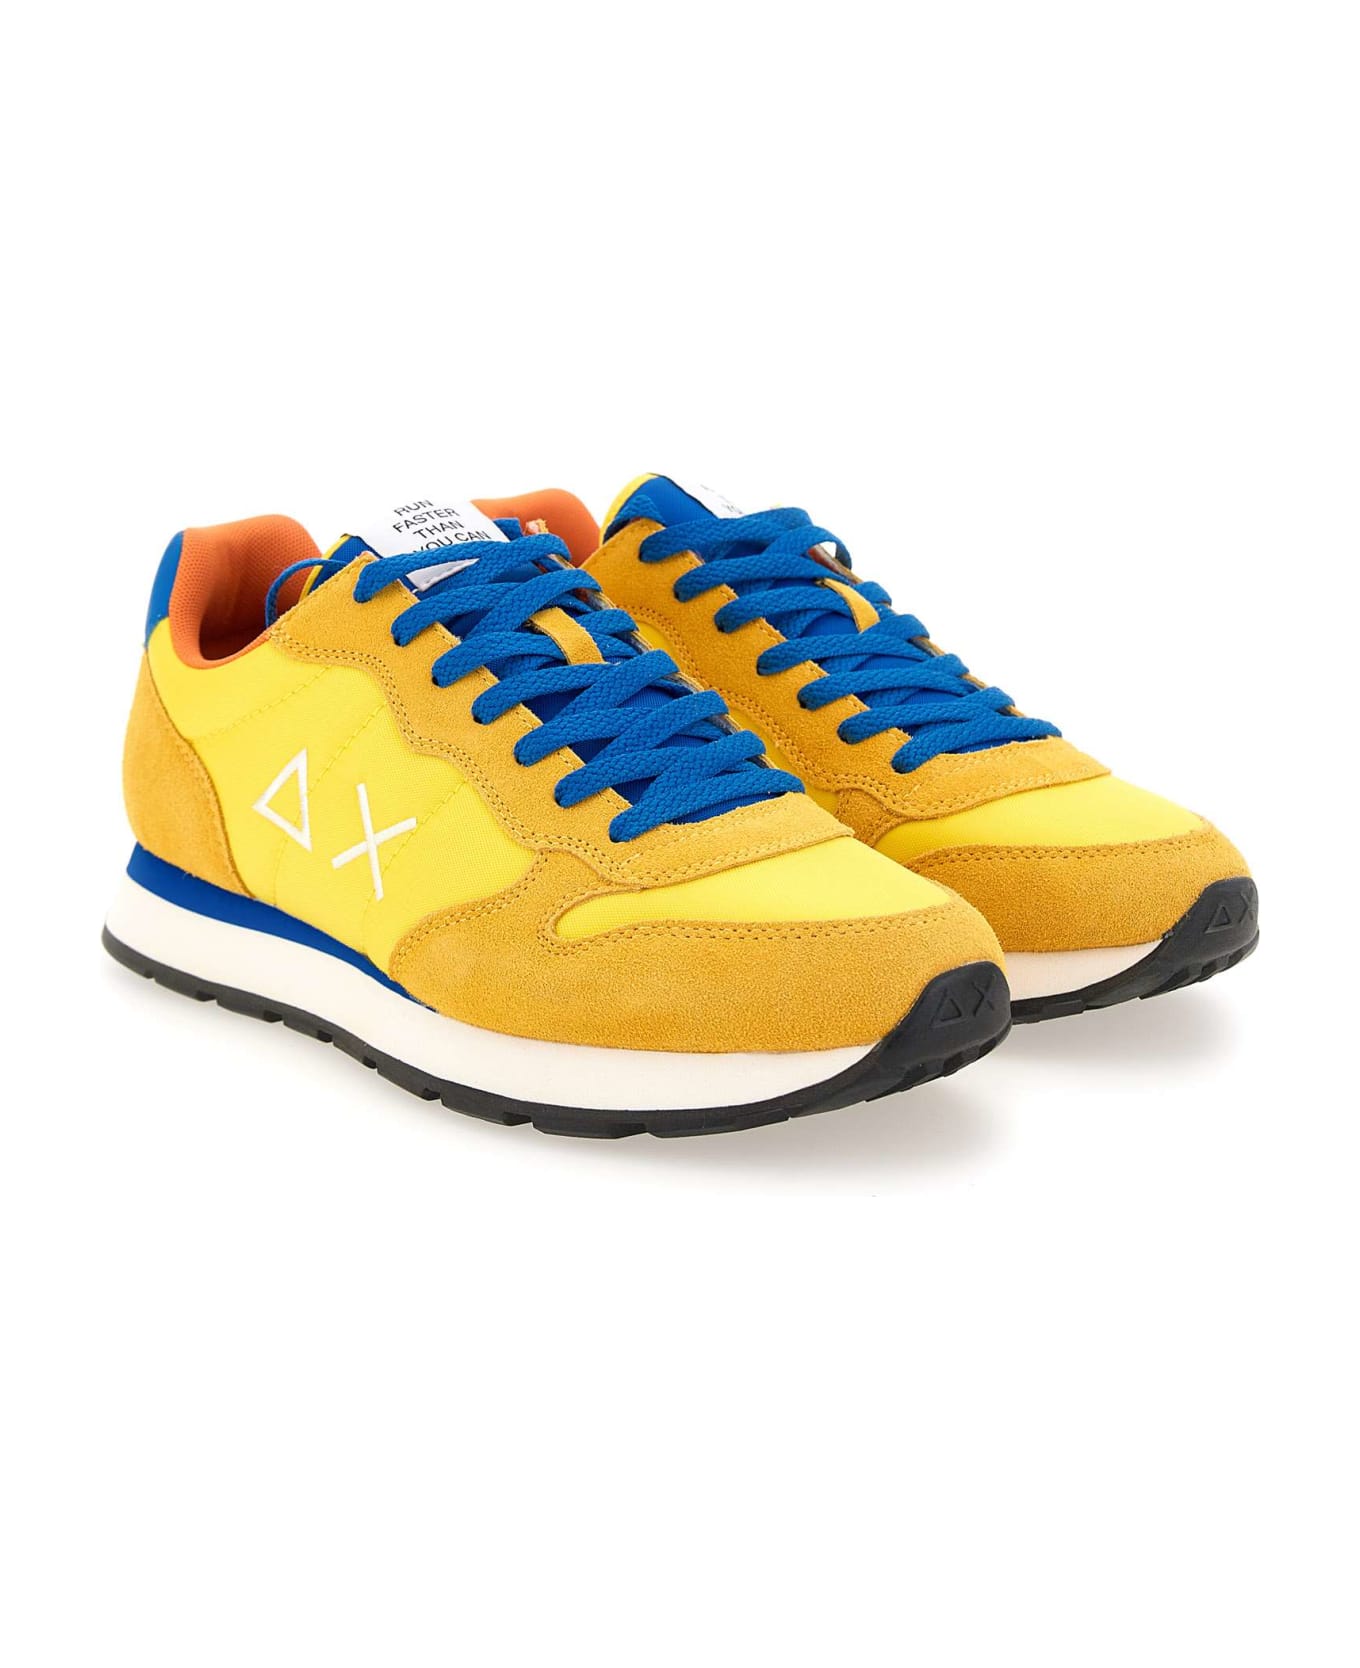 Sun 68 "tom Solid" Sneakers - YELLOW